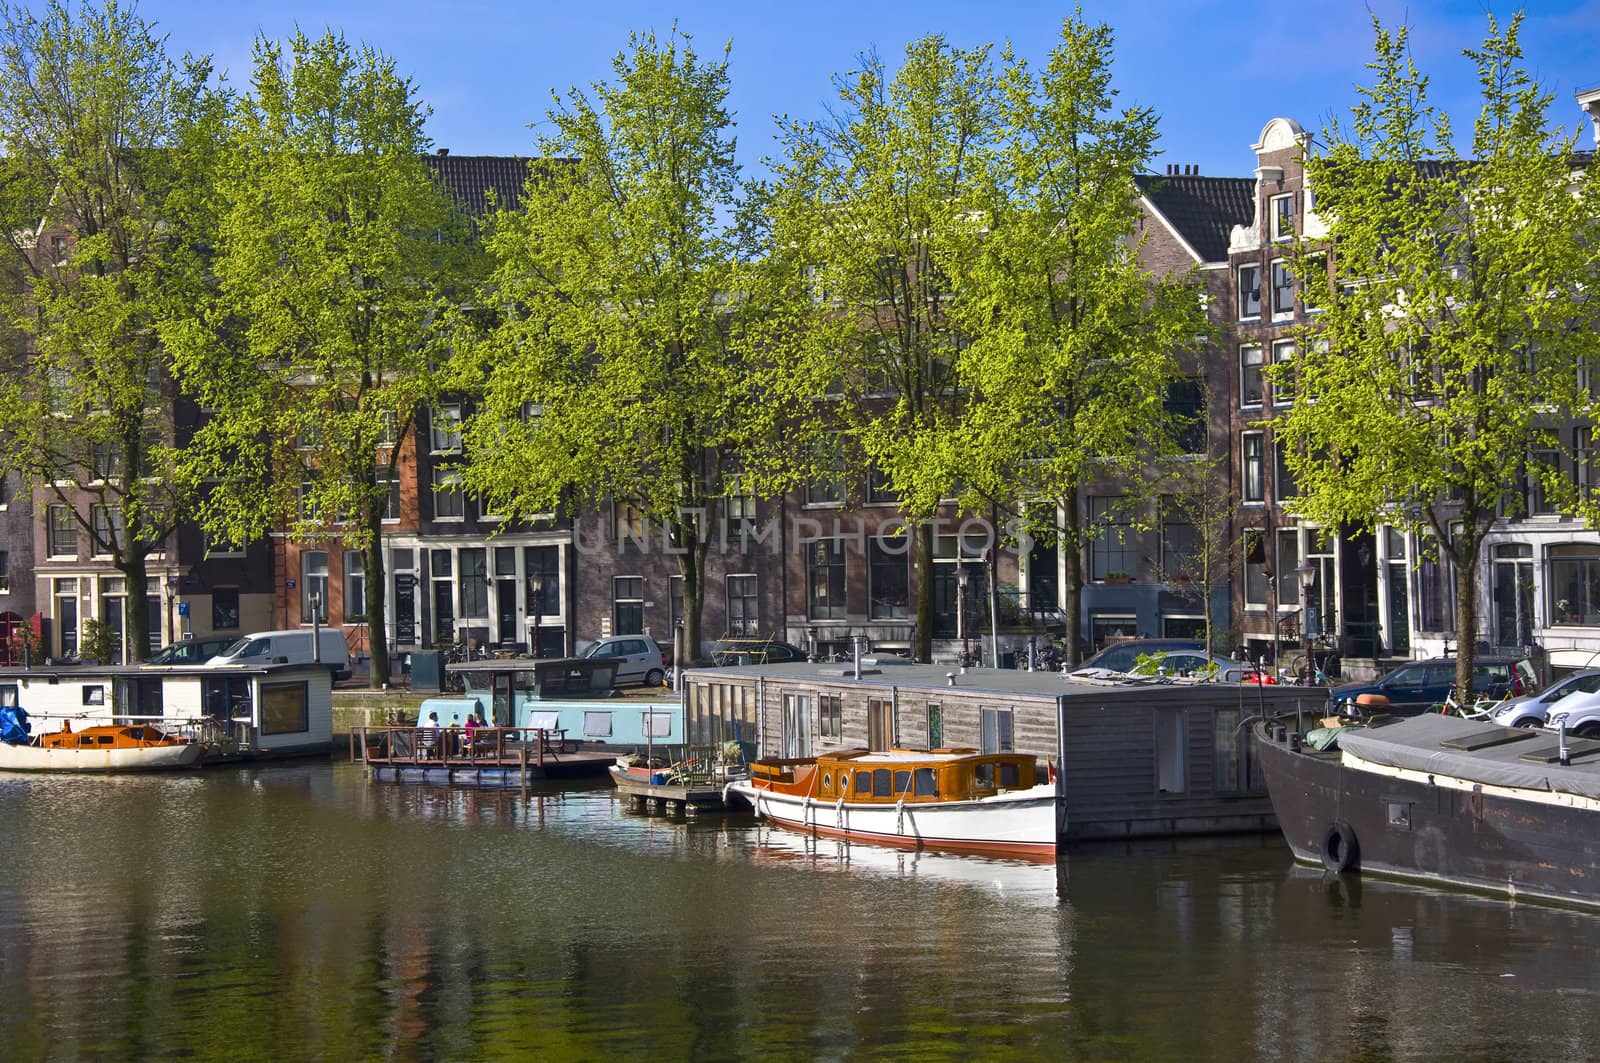 Classic view of Amsterdam. Embankment with barge. Green trees against the background of Dutch houses.